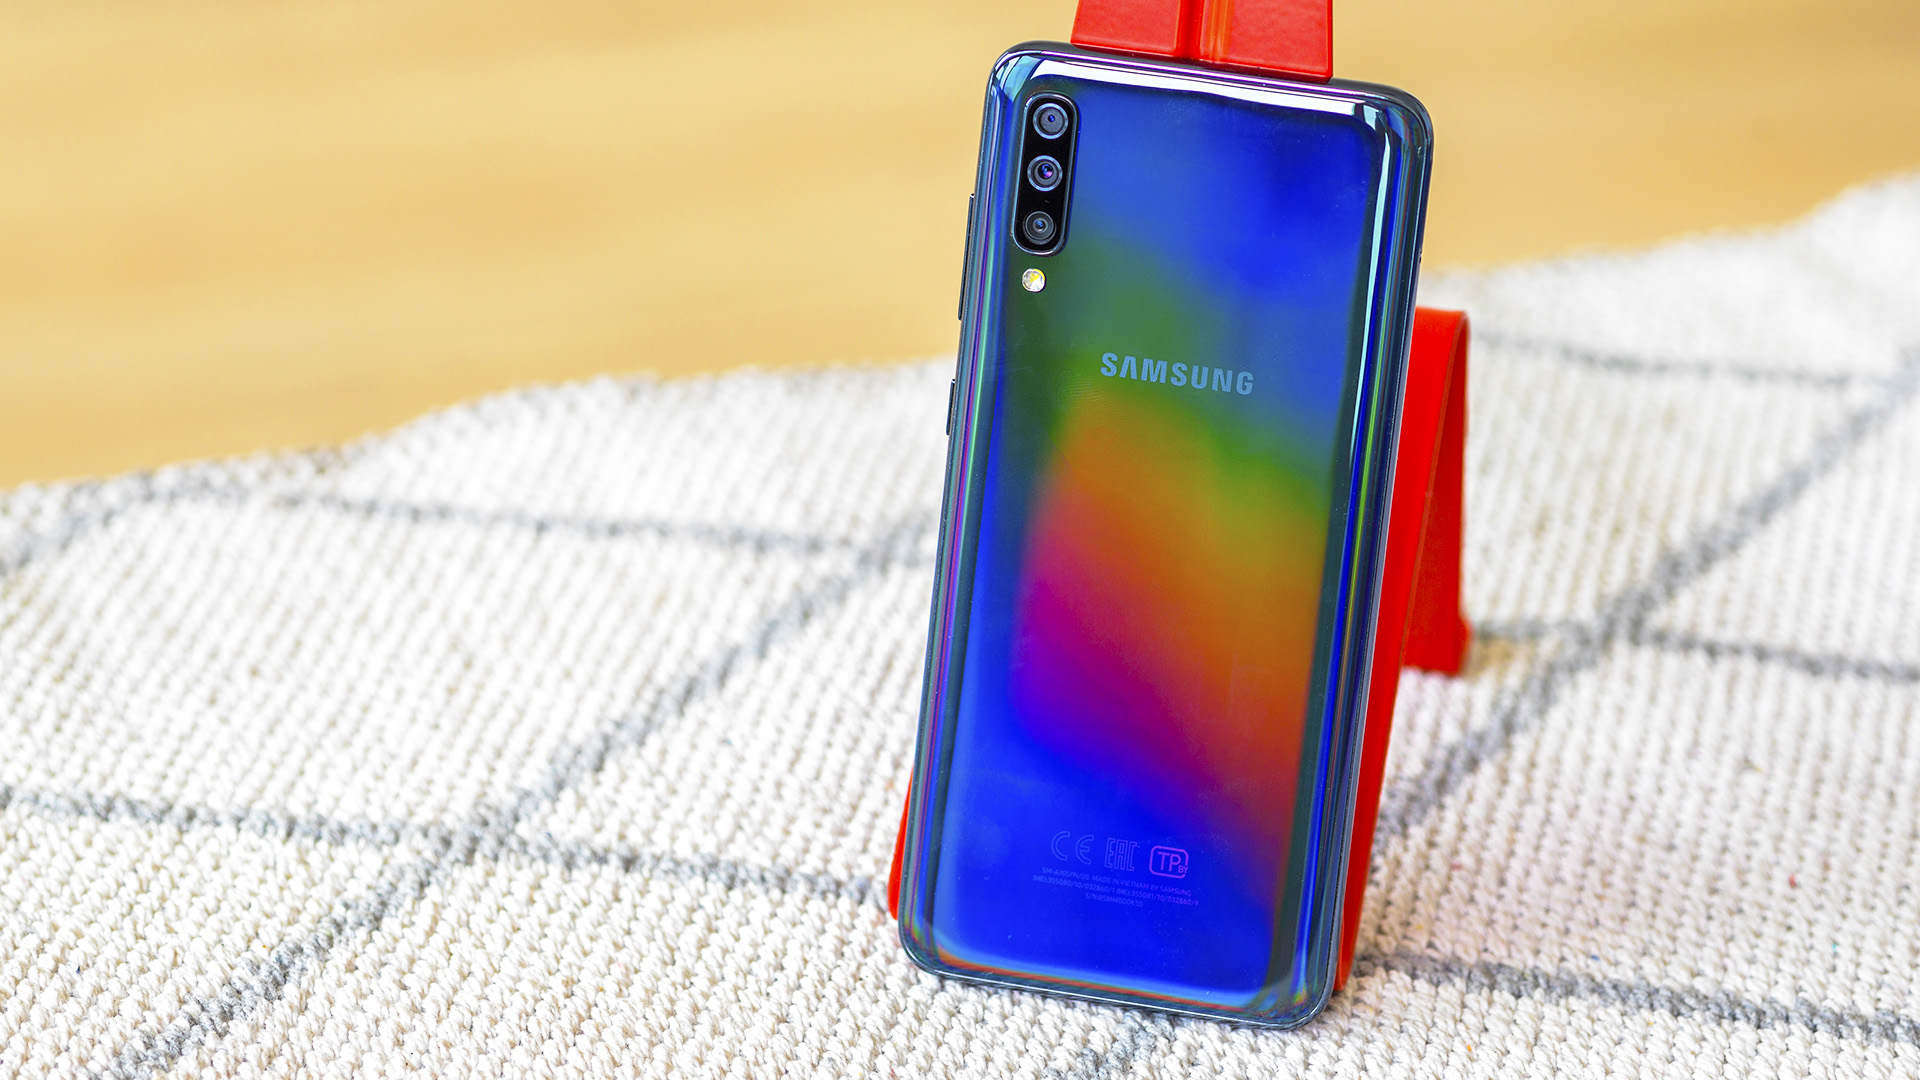 Samsung Galaxy A70s rollout in India with Android 10